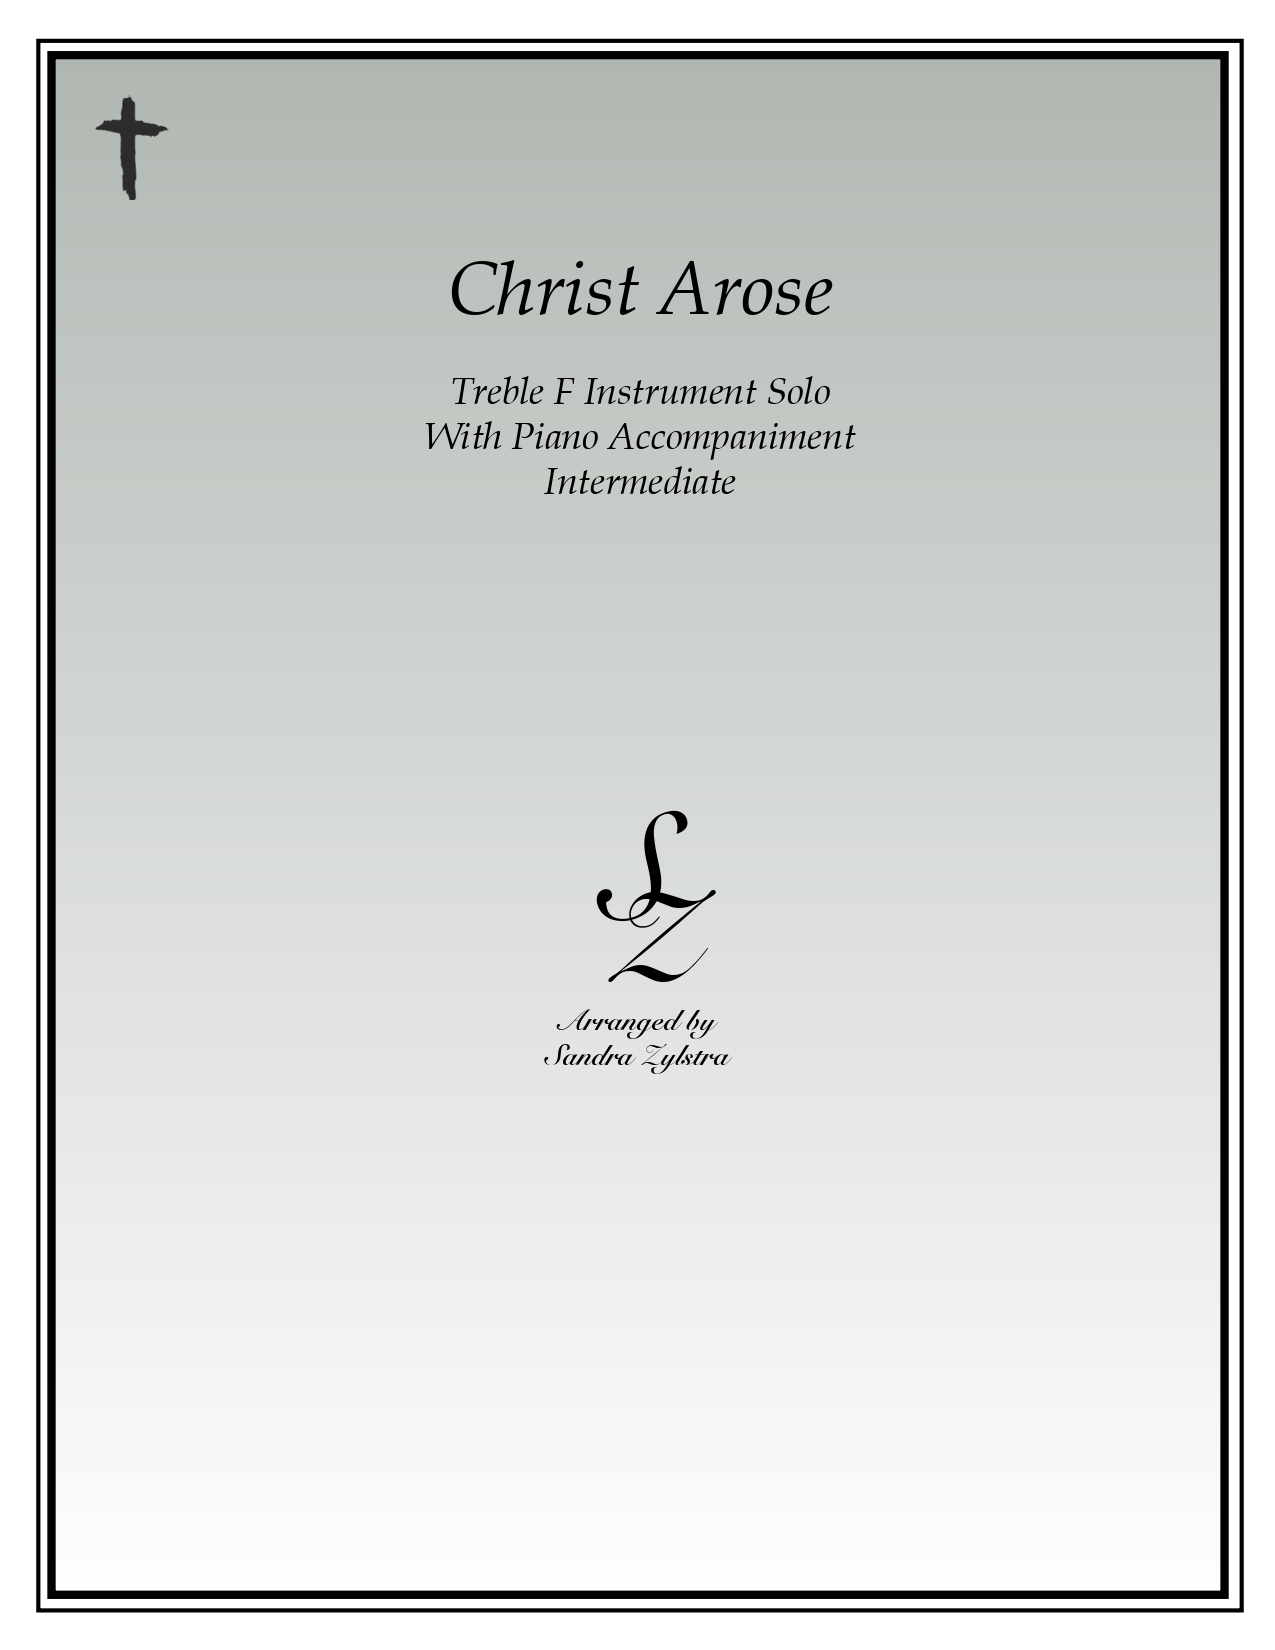 Christ Arose F instrument solo part cover page 00011